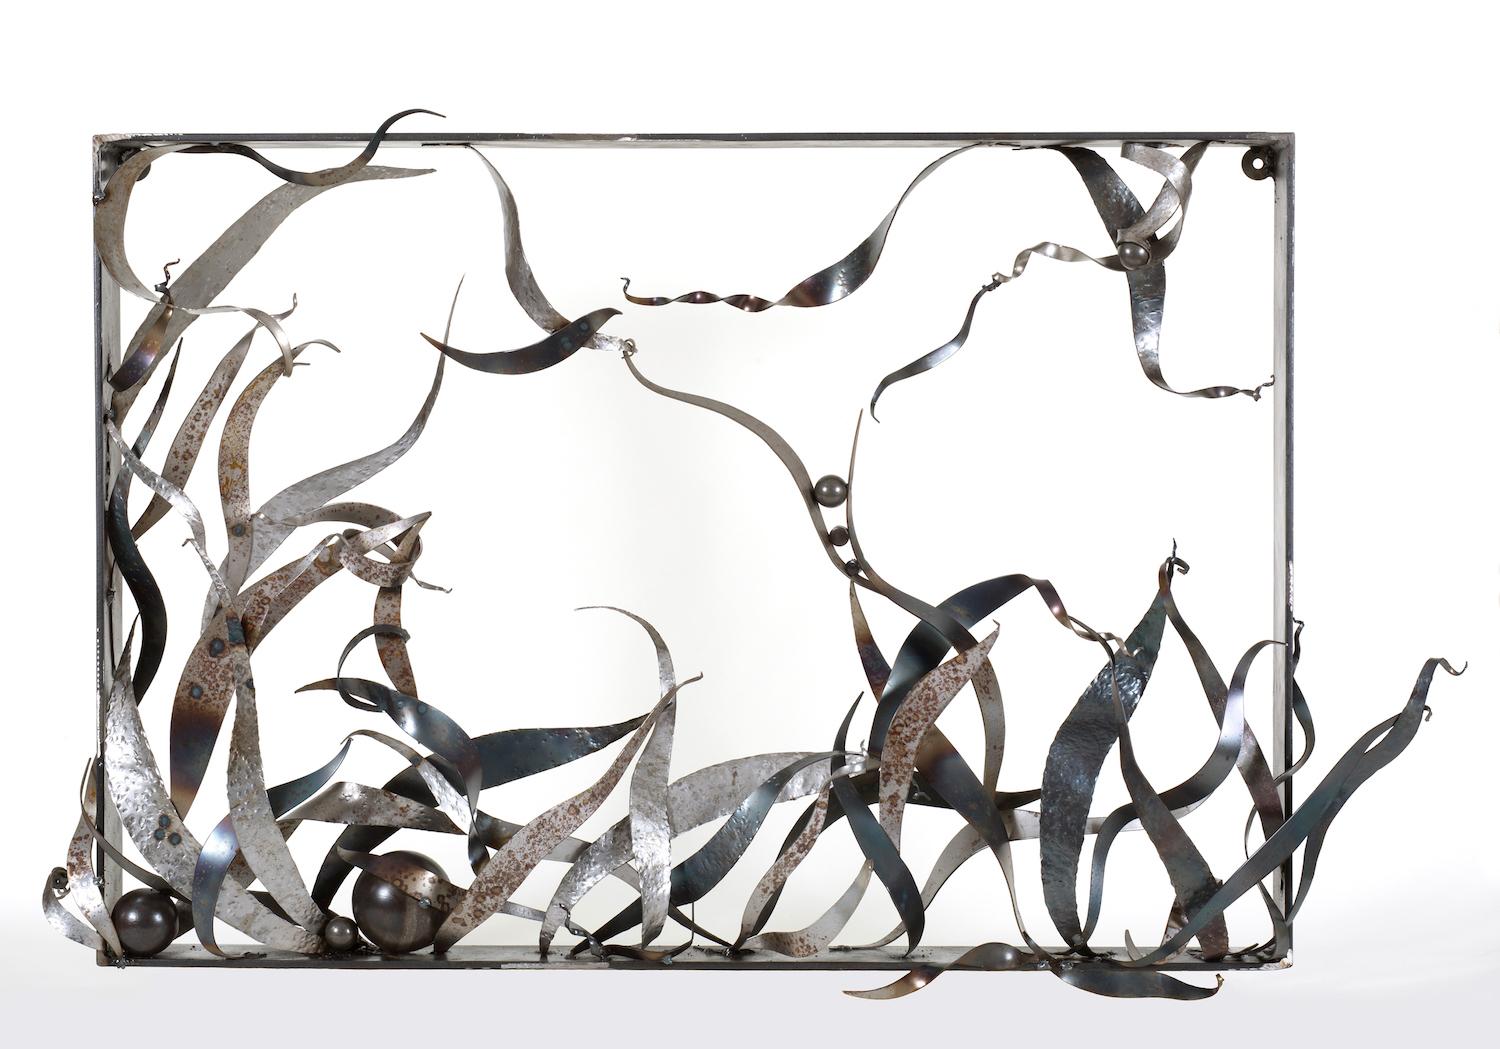 Sarah Alexander Abstract Sculpture - "Please Keep Off the Grass", steel, abstract, wall sculpture with stand